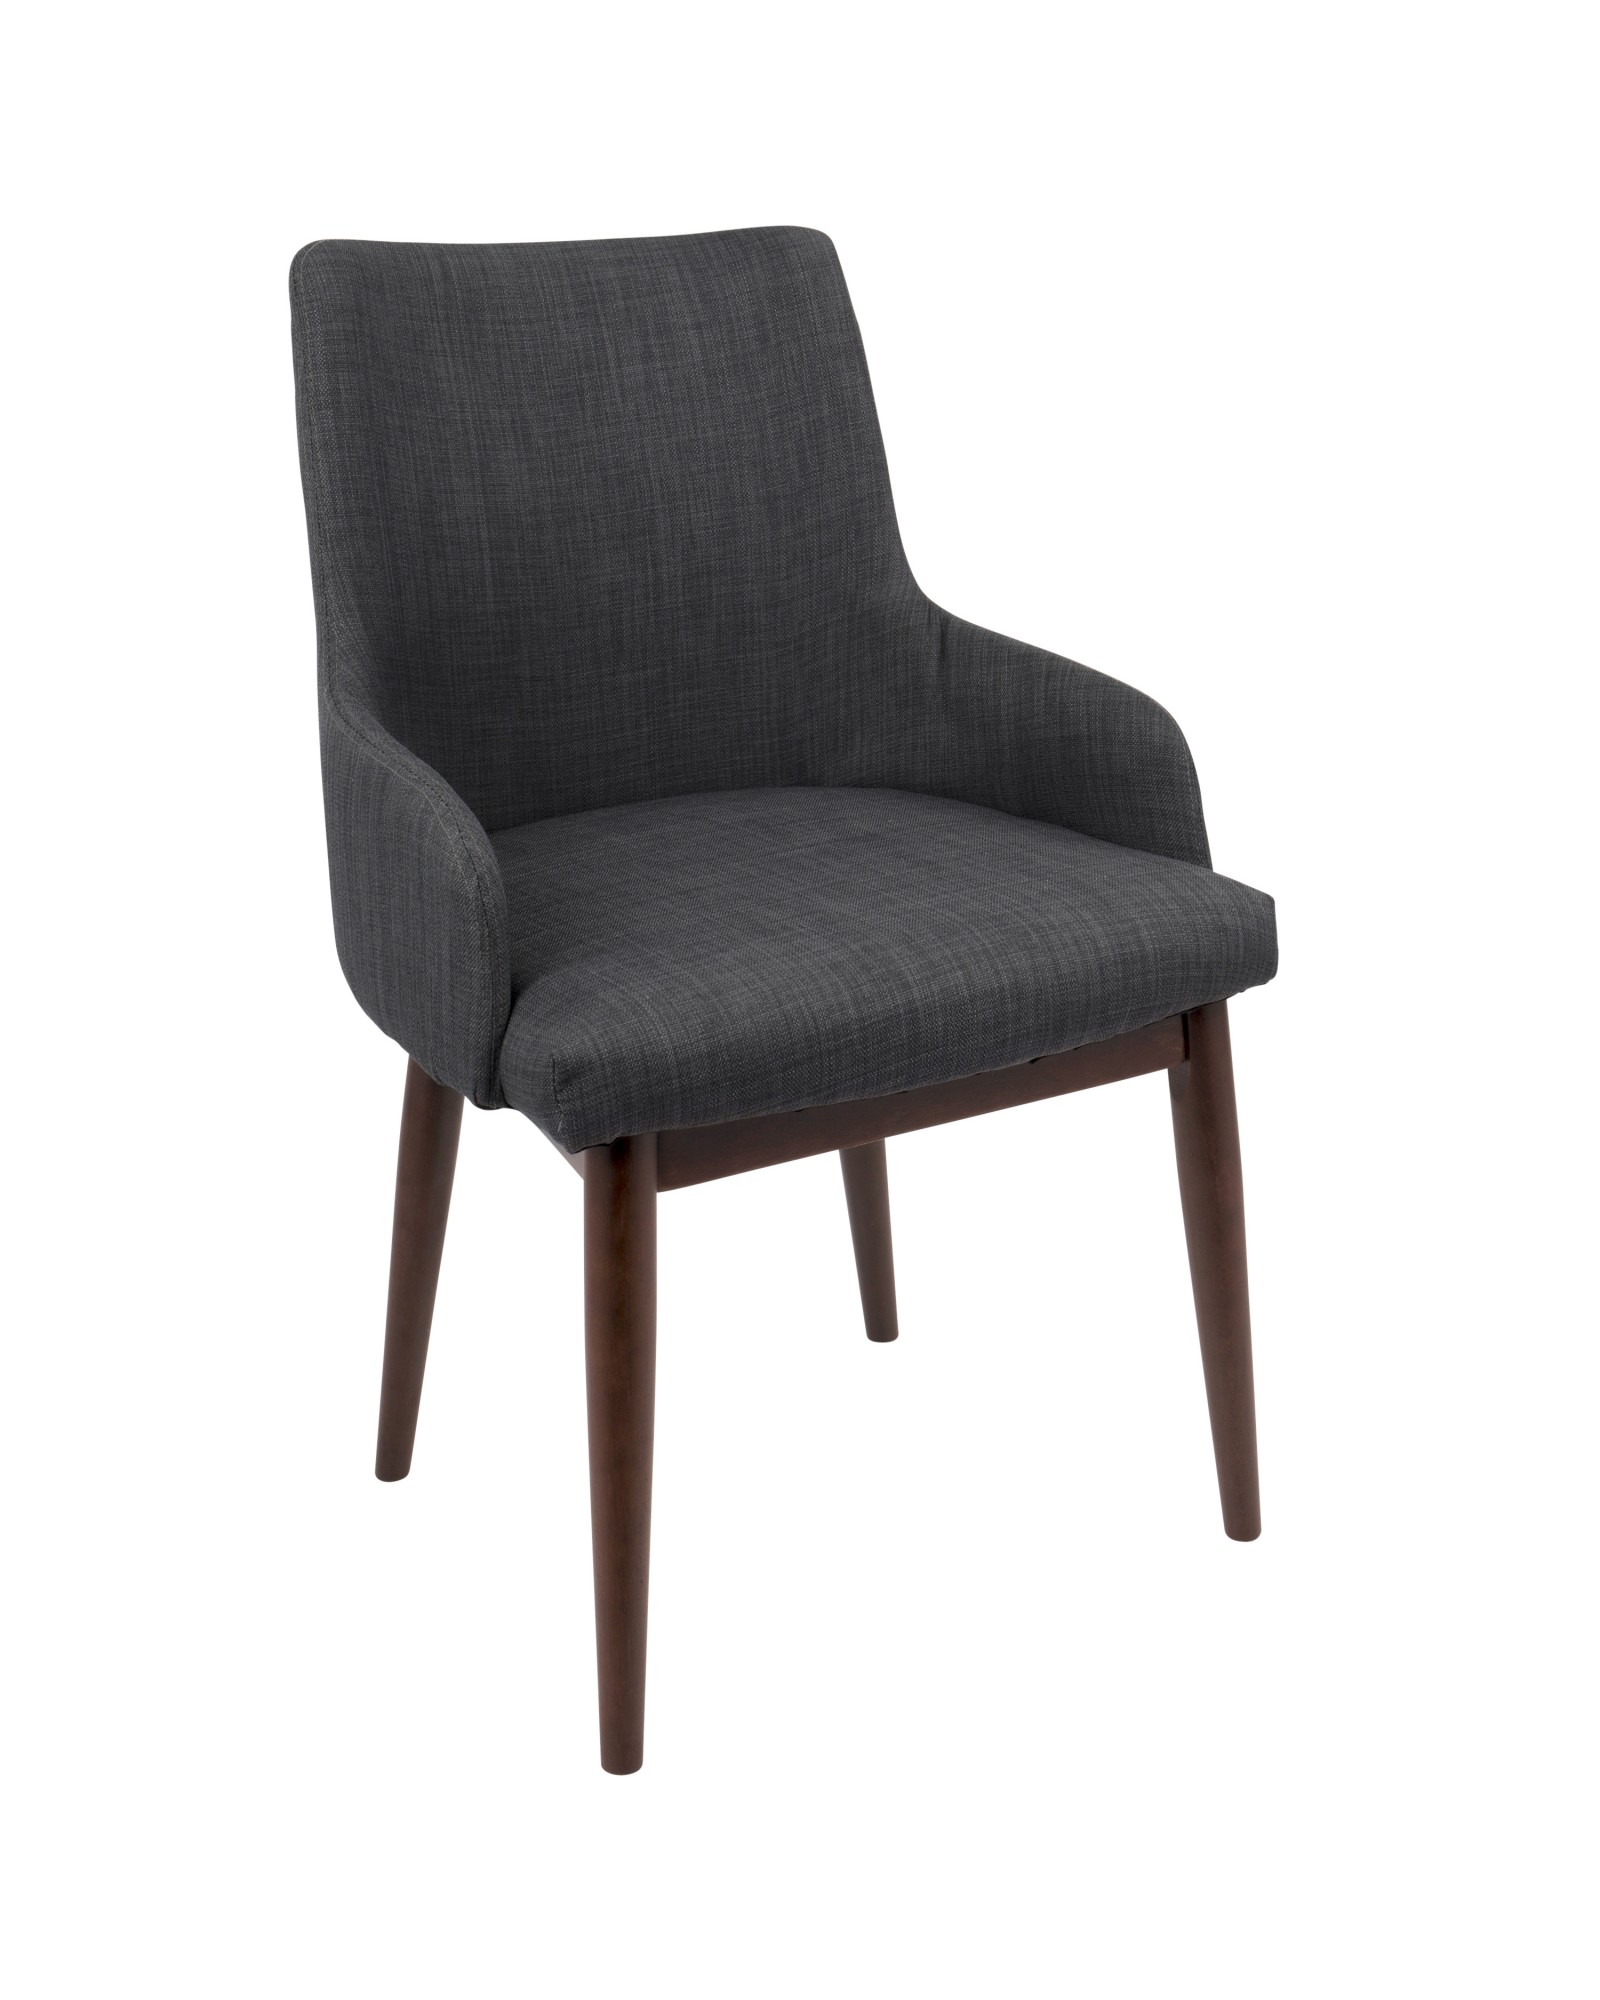 Santiago Mid-Century Modern Dining/Accent Chair in Walnut with Charcoal Fabric - Set of 2